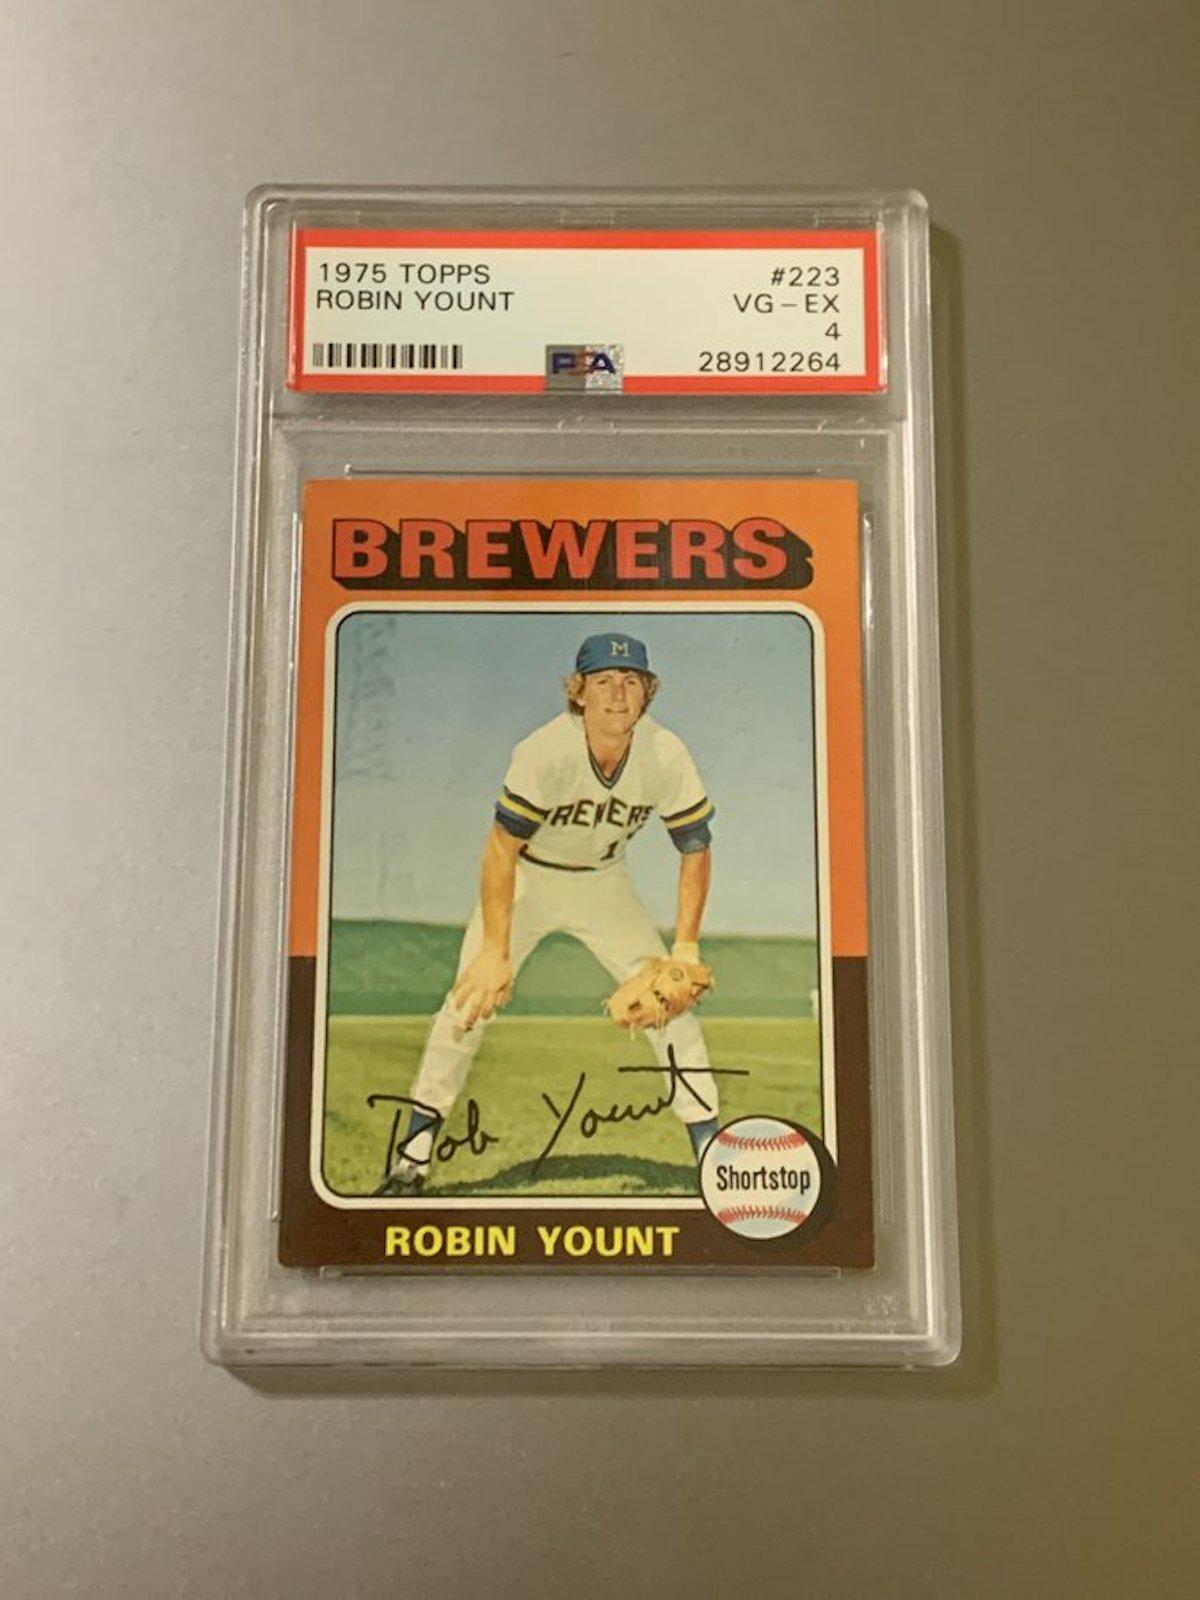 RARE ERROR BASEBALL CARDS WORTH MONEY - VALUABLE CARDS TO LOOK FOR